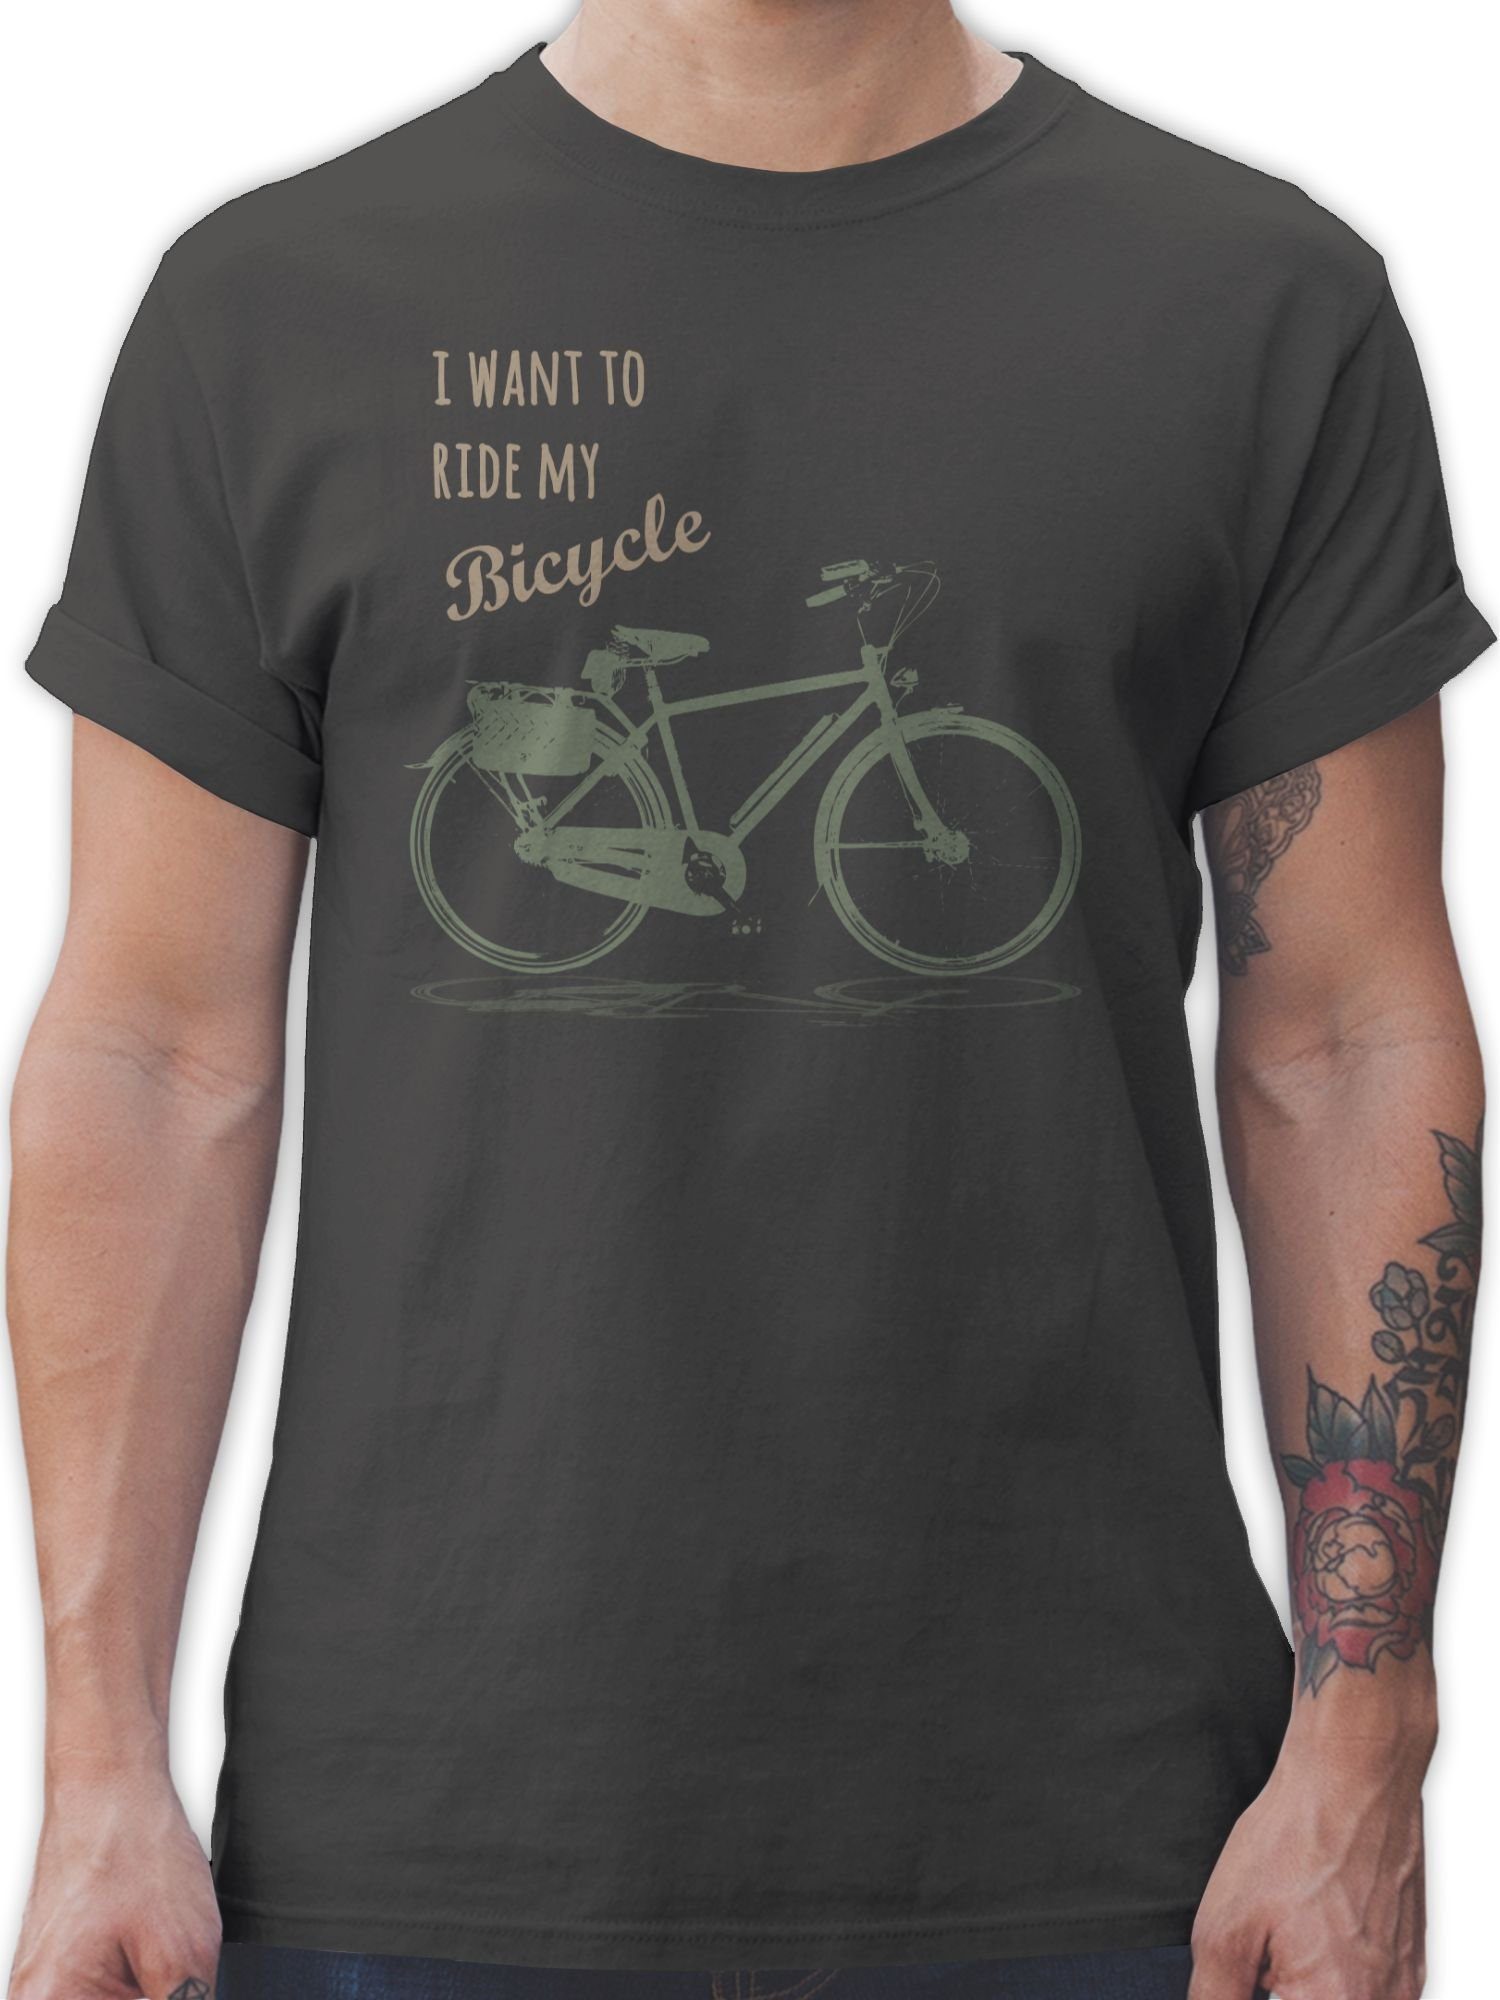 Shirtracer T-Shirt I want to ride my bicycle Vintage Retro 1 Dunkelgrau